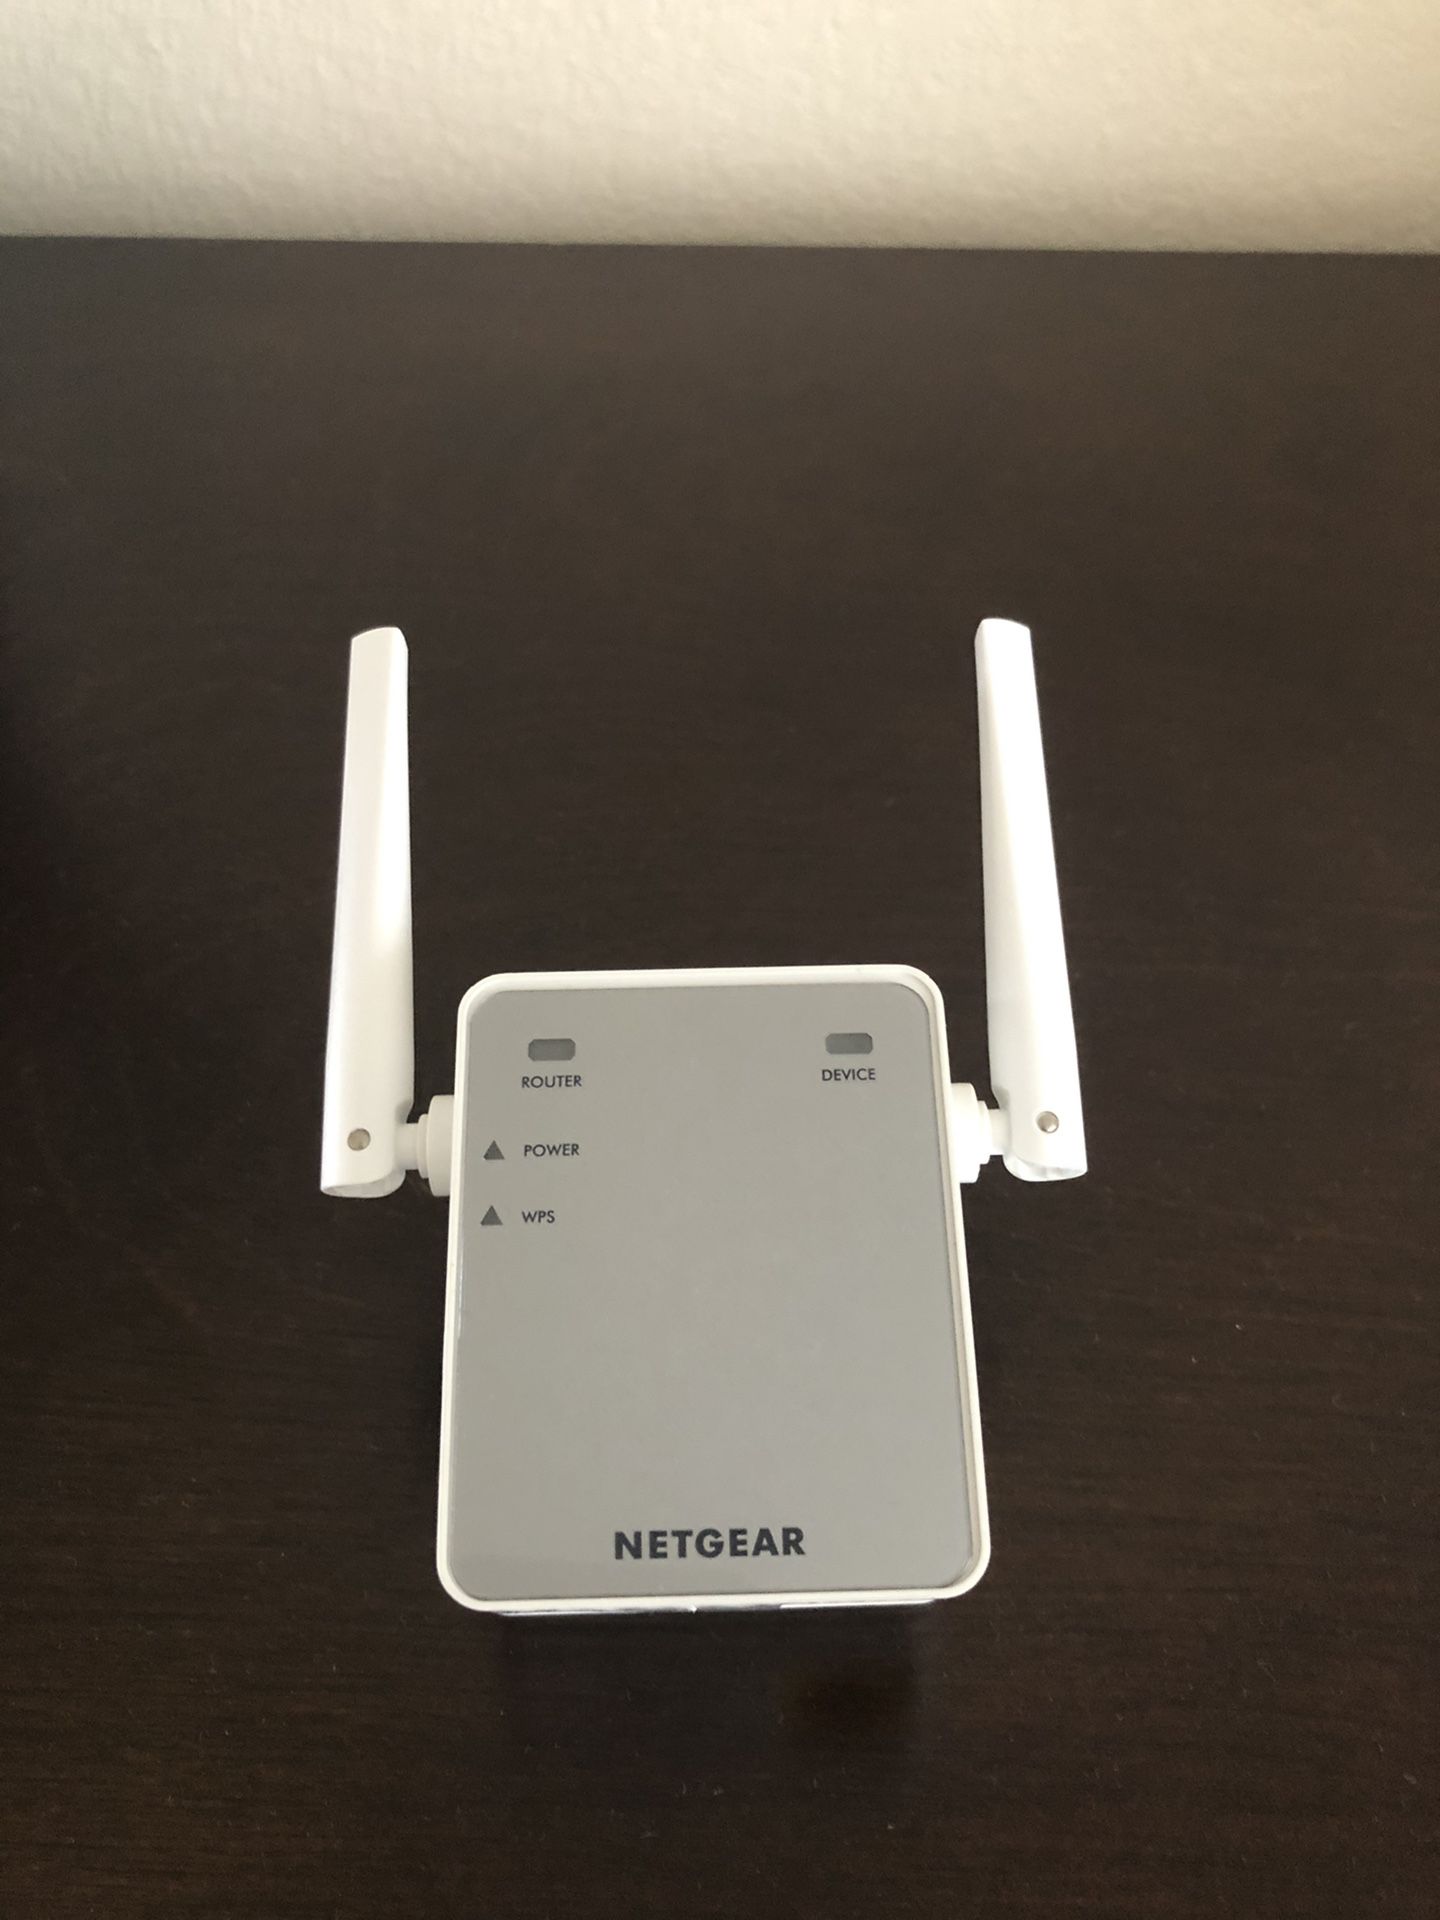 NETGEAR WiFi Range Extender Coverage up to 800 sq.ft. and 10 devices